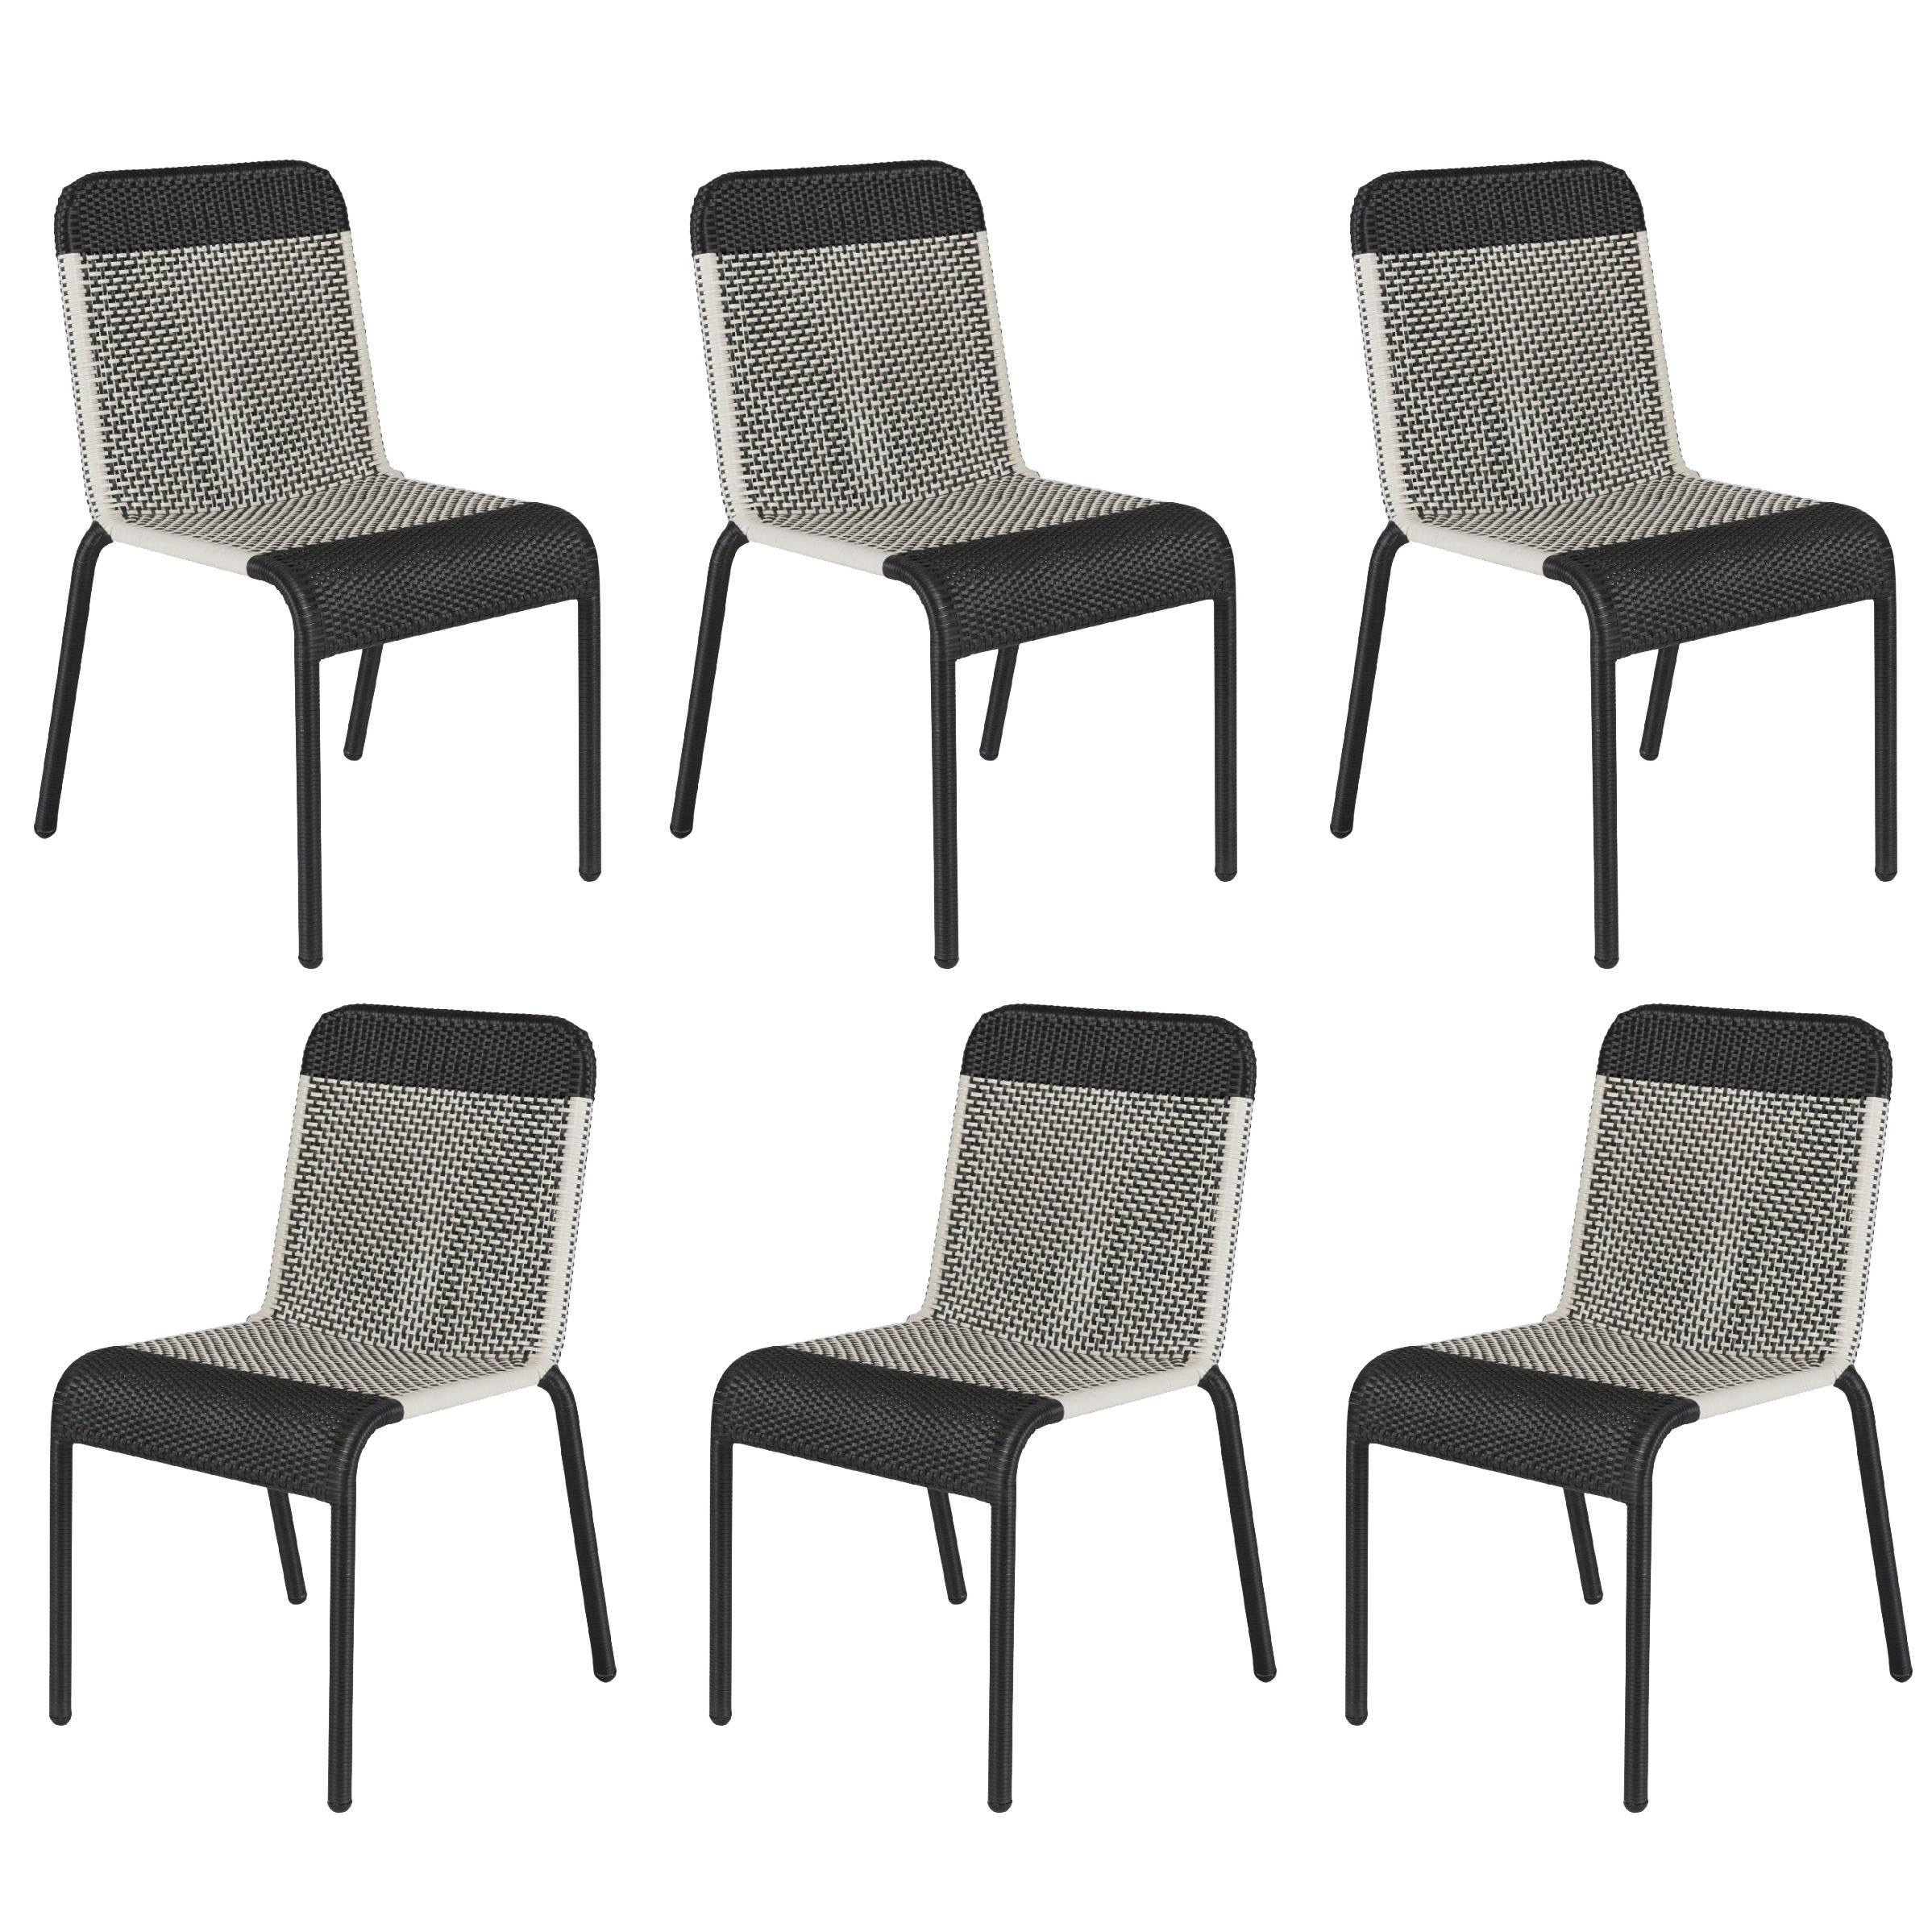 Set of Six Black and White Resin Stackable Outdoor Chairs For Sale